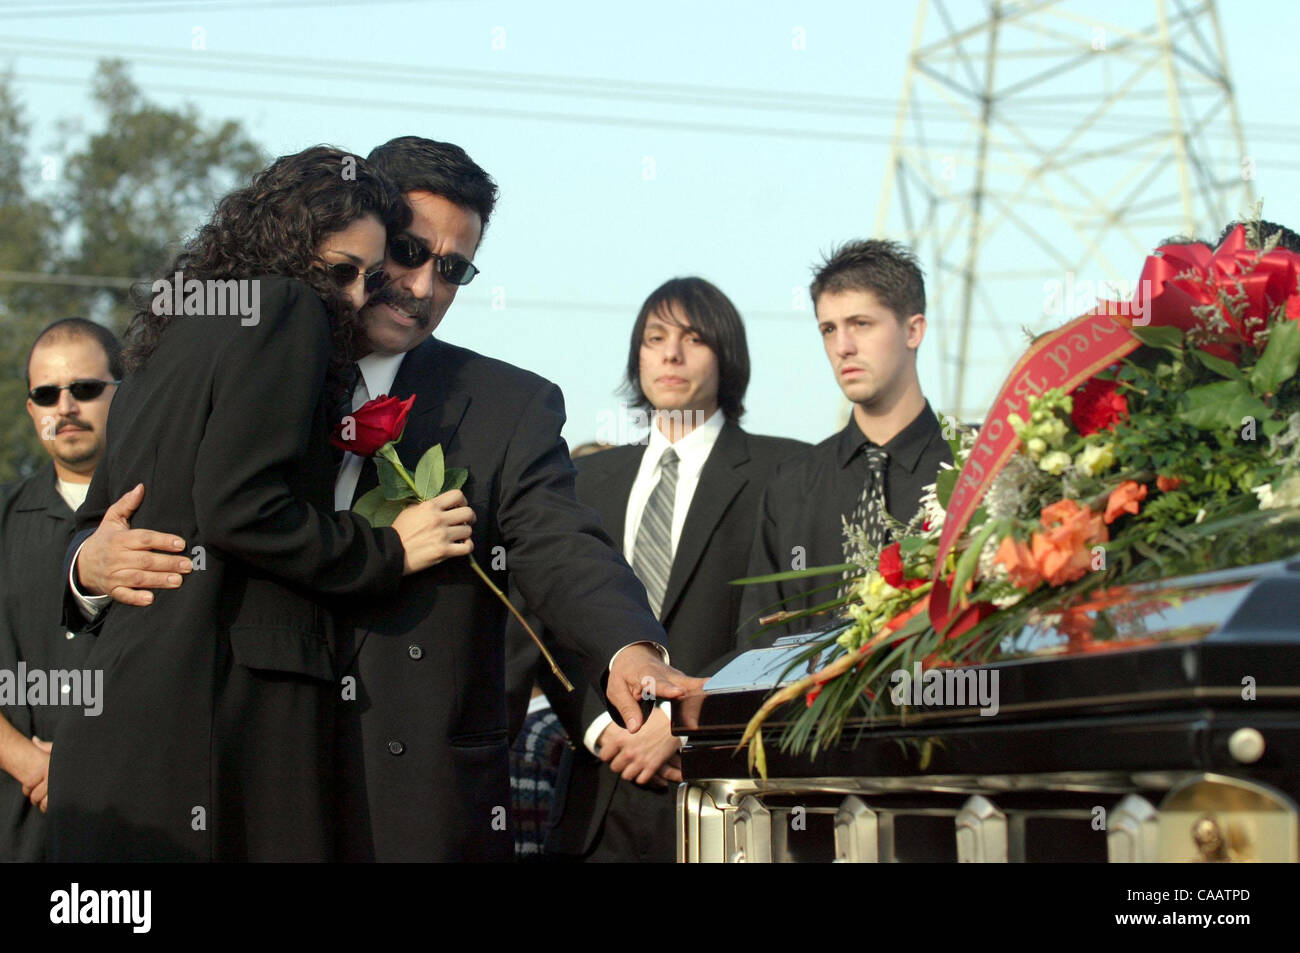 Raquel Orozco cq (left) and her dad Gilbert Orozco hug near the casket of Christopher Armstrong during funeral services for Christopher, who was 24 years-old, and his mother Mary Helen Armstrong at Holy Cross Cemetery in Antioch, Calif. on Thursday, January 29, 2004. Gilbert Orozco is Mary Armstrong Stock Photo